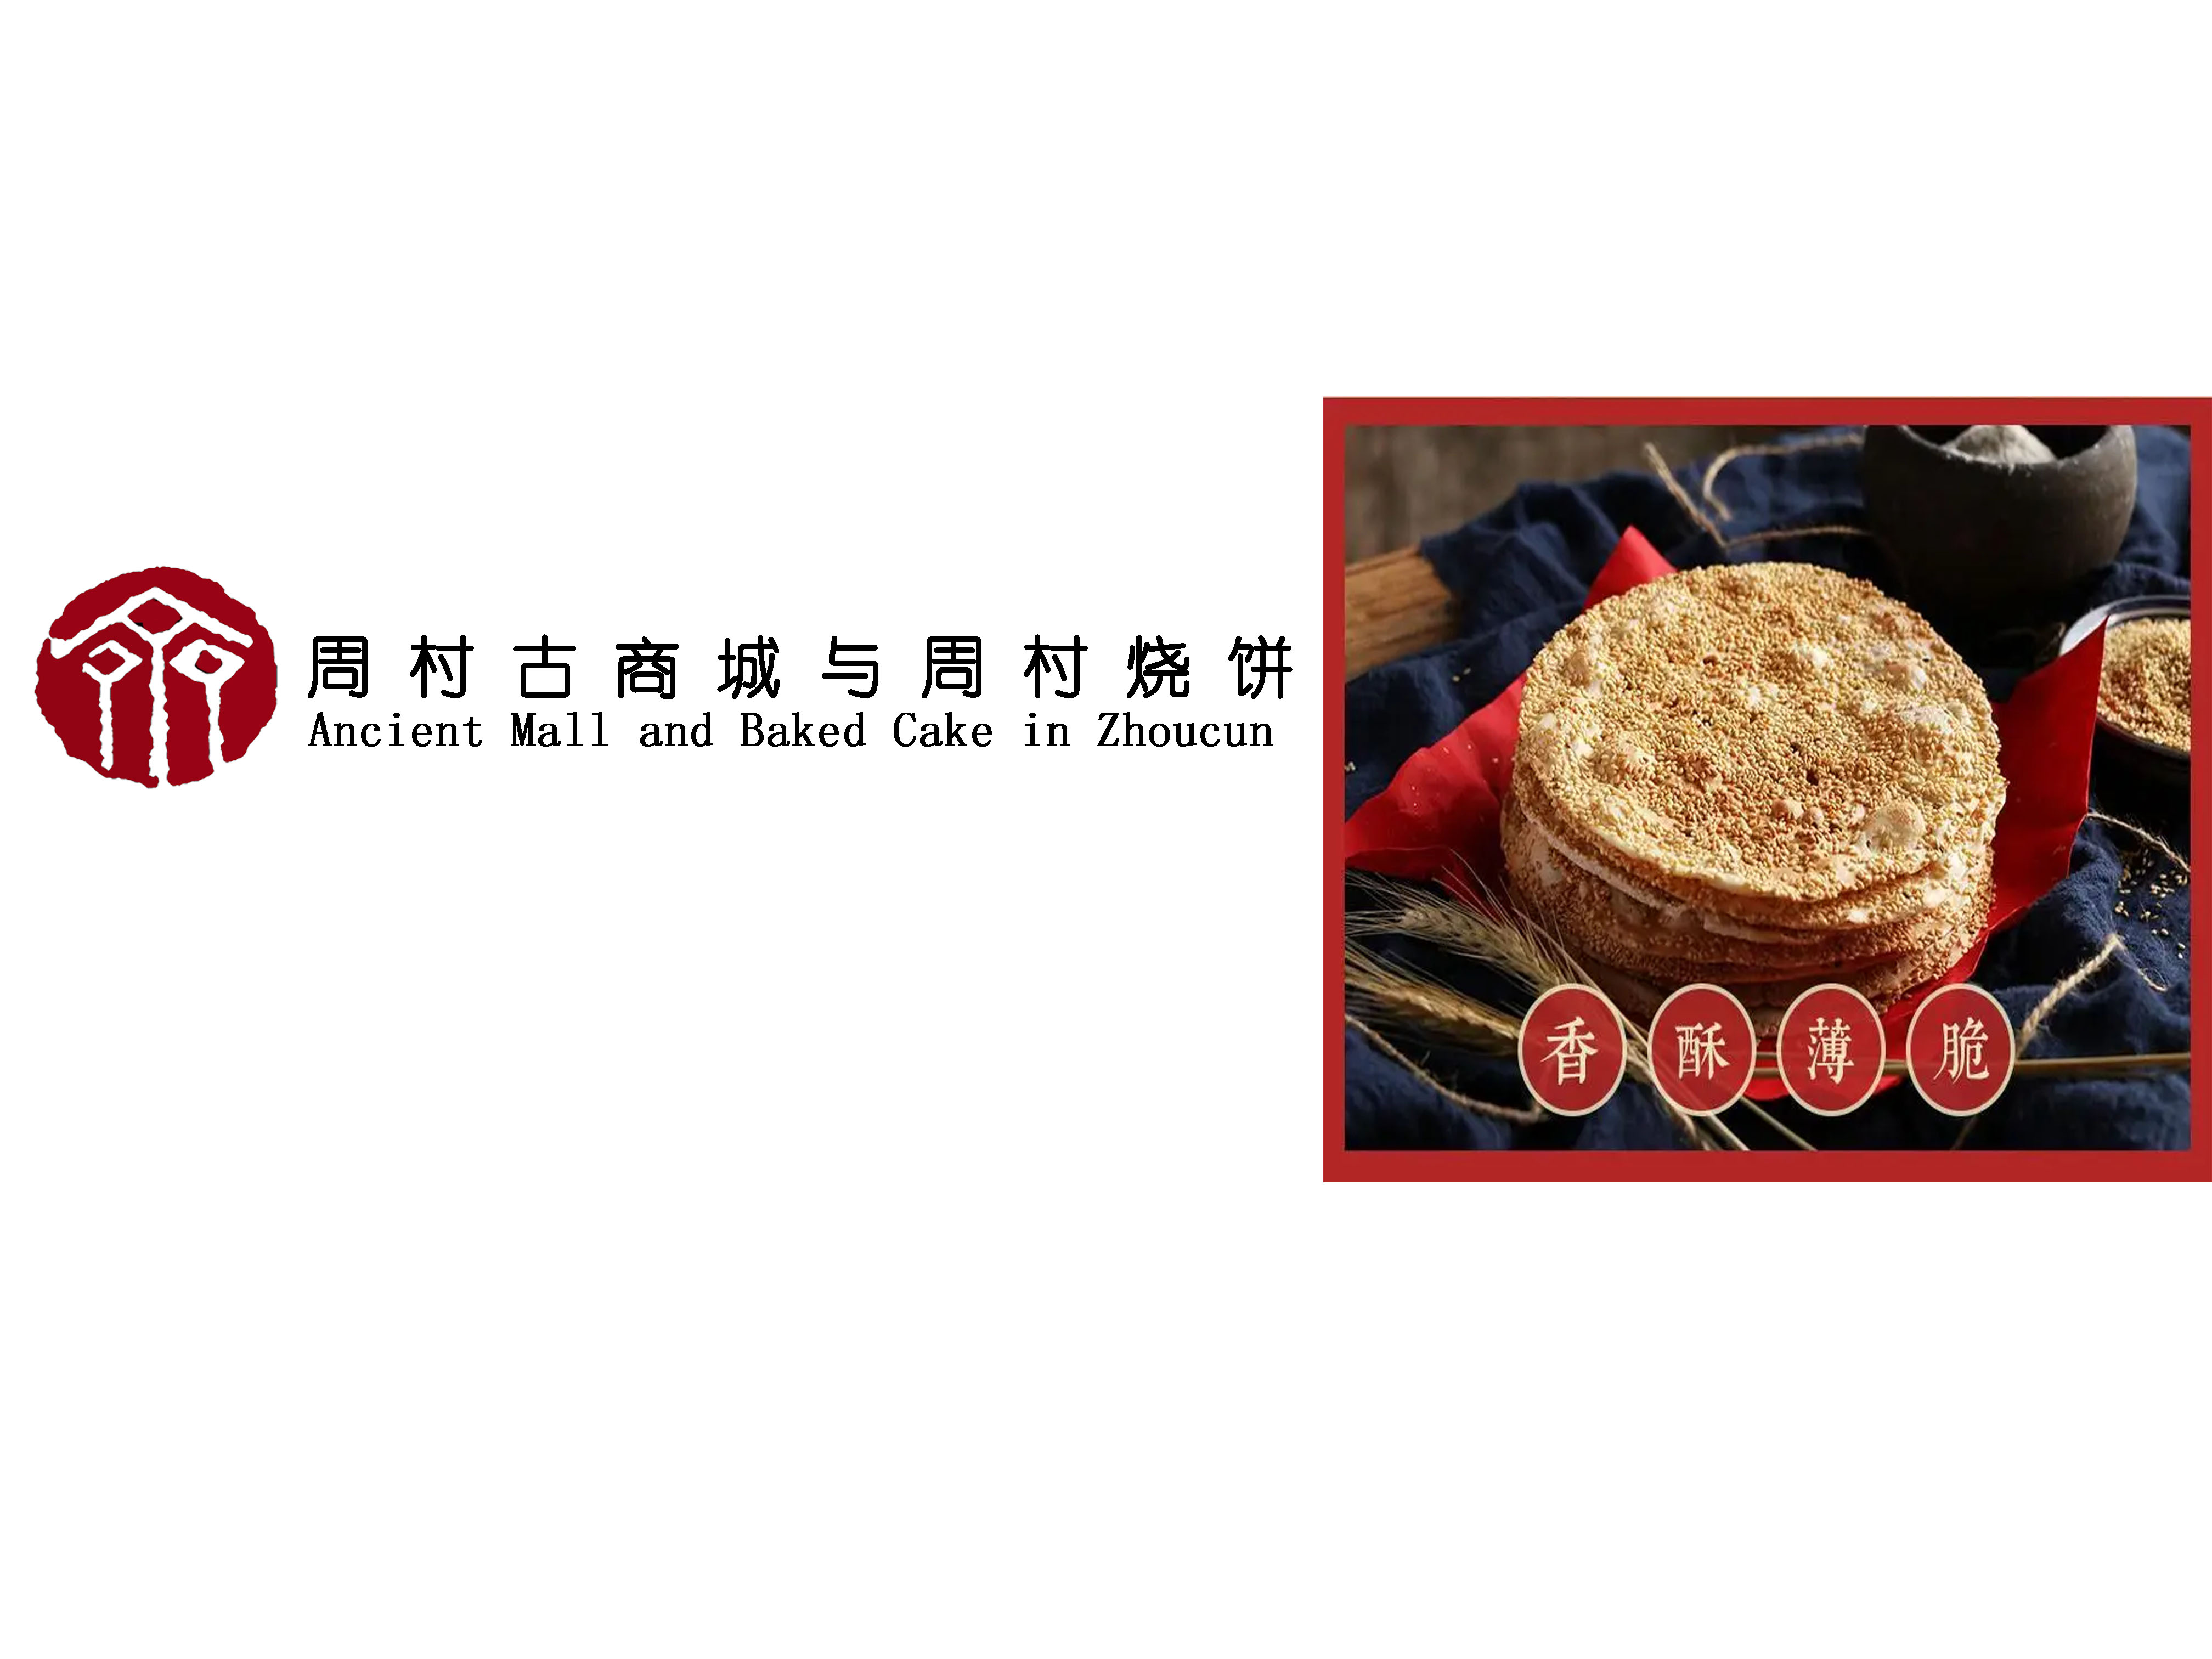 Ancient Mall and Baked Cake in Zhoucun